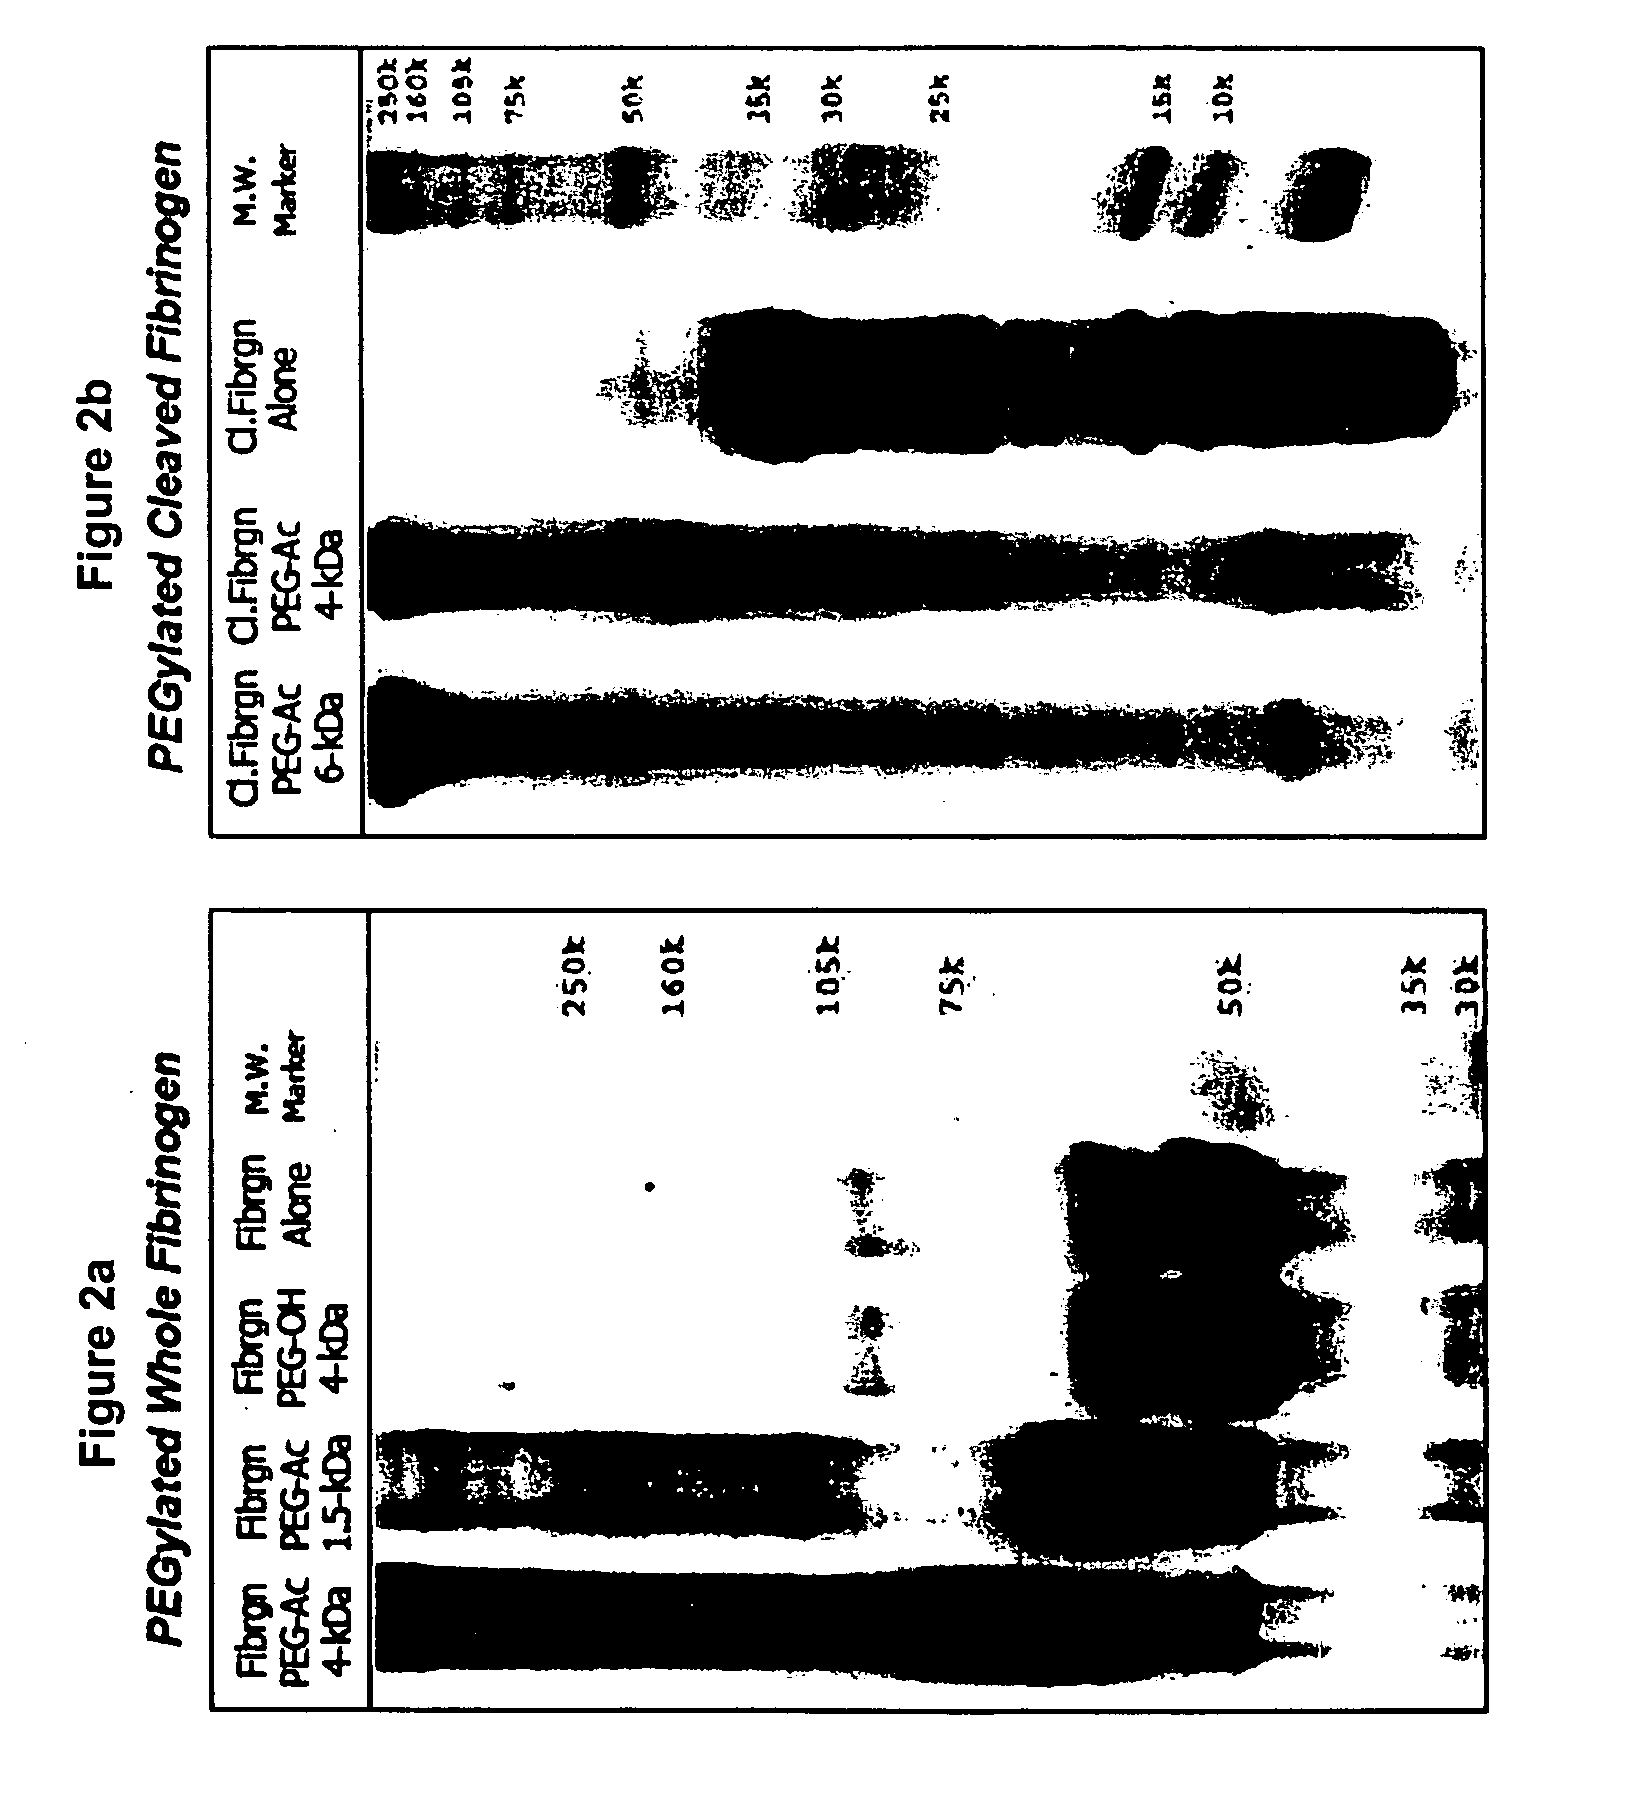 Matrix composed of a naturally-occurring protein backbone cross linked by a synthetic polymer and methods of generating and using same